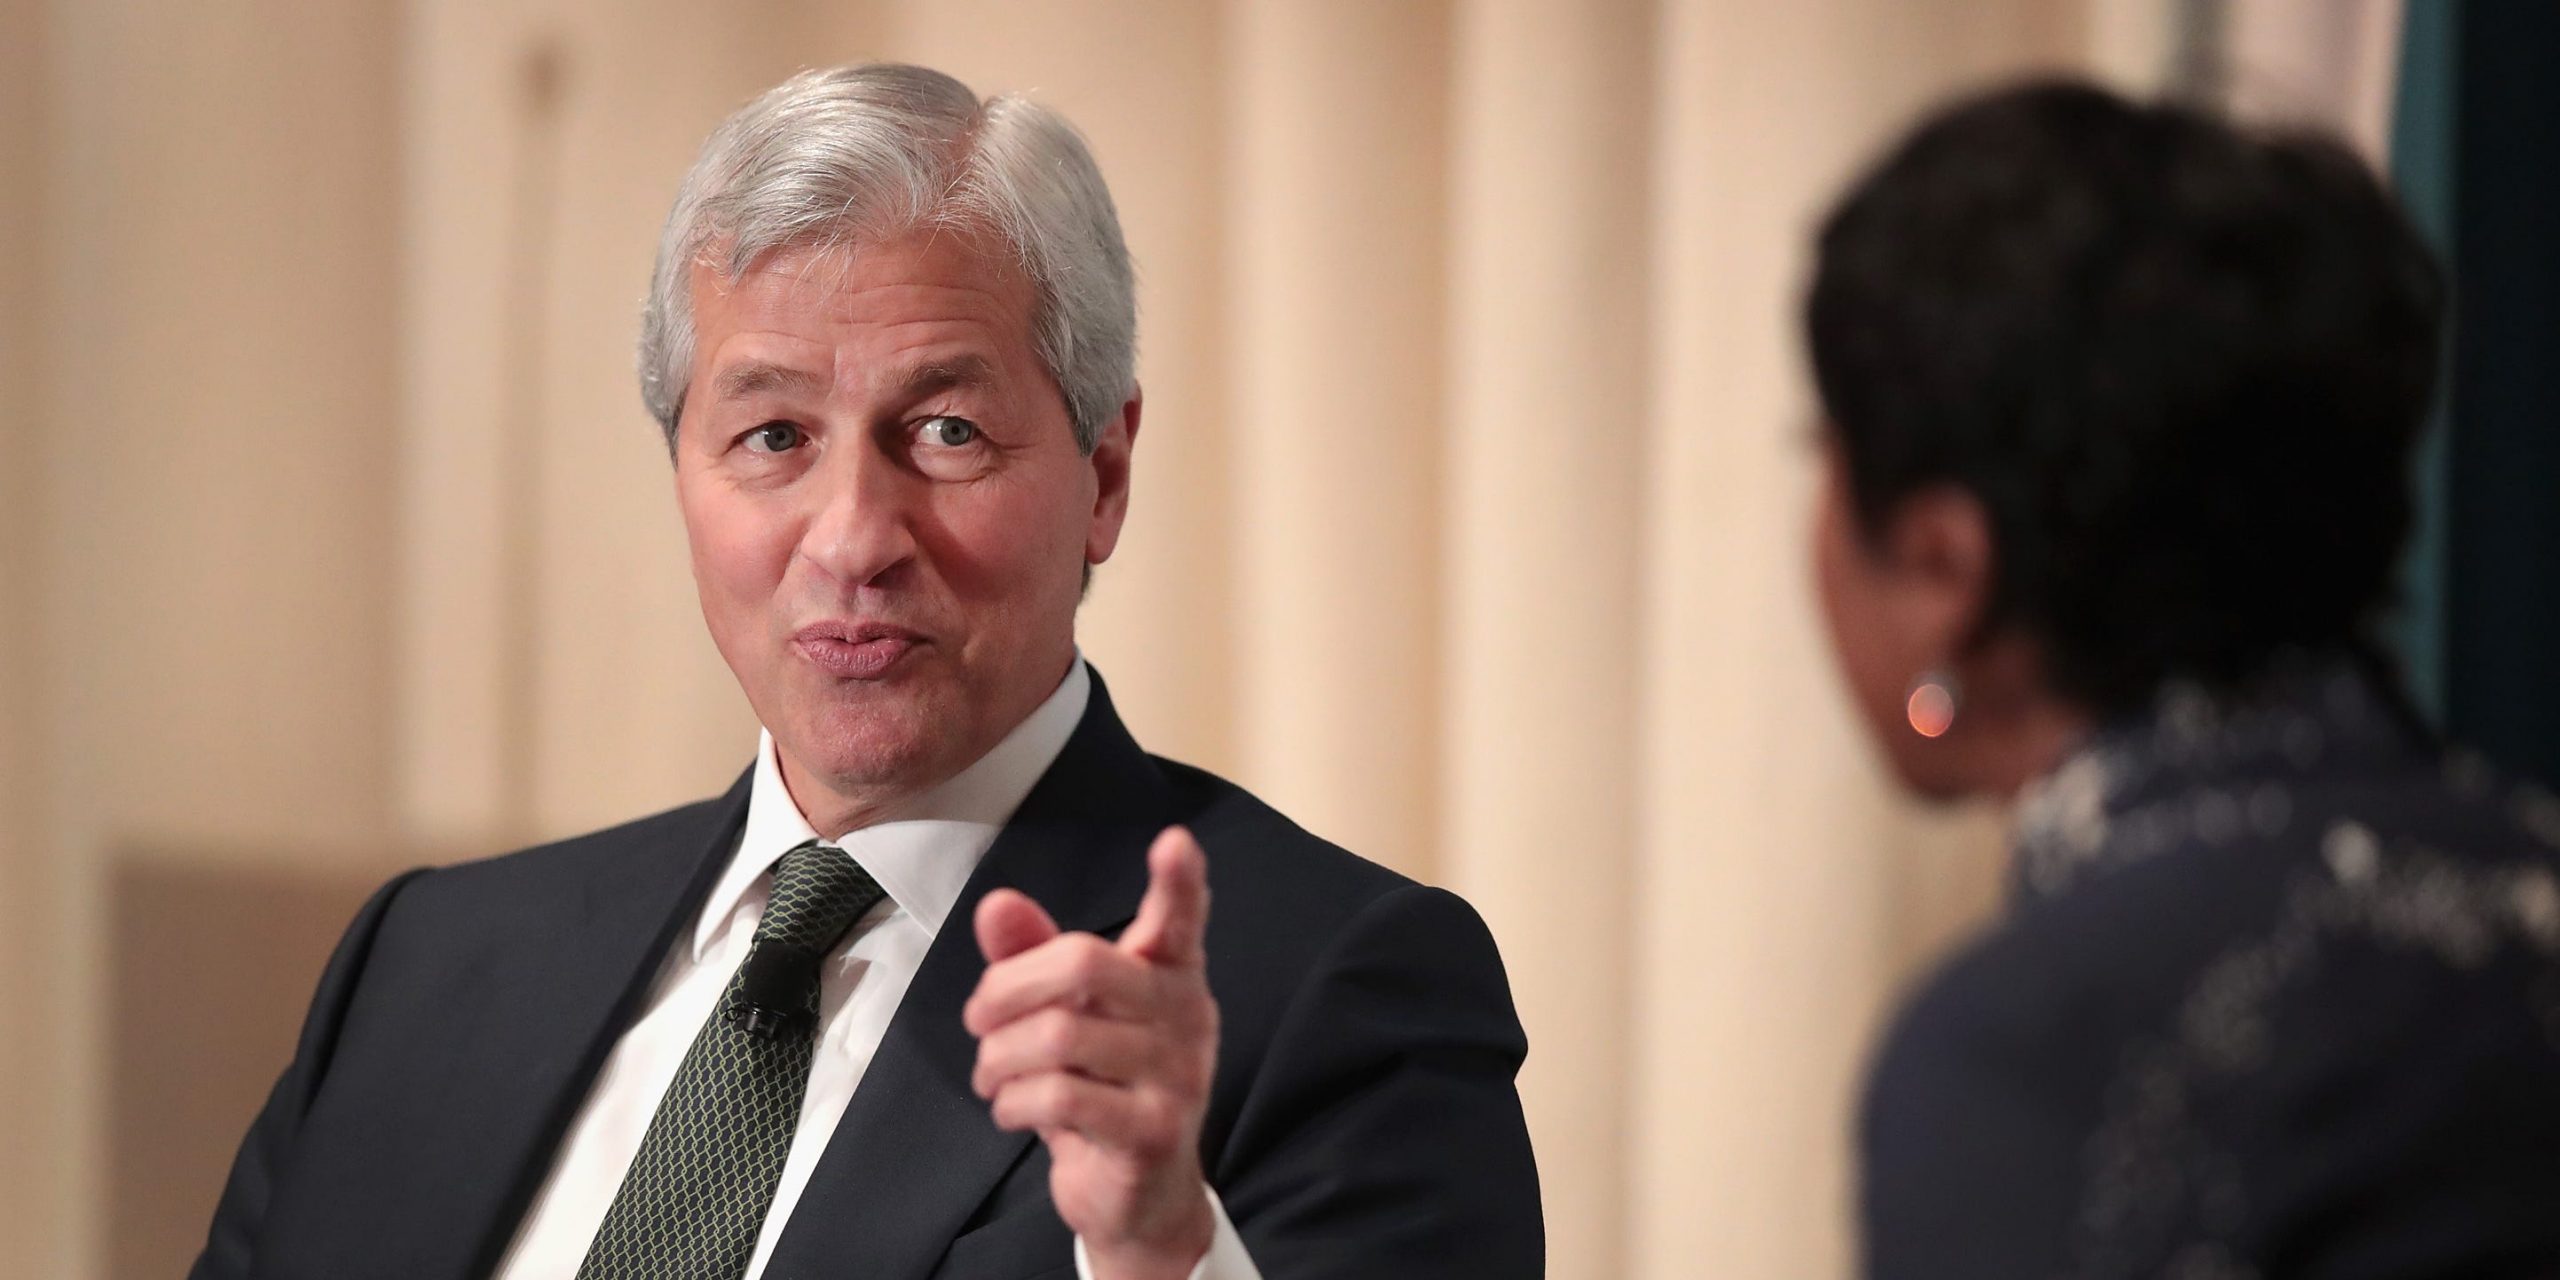 Jamie Dimon, Chairman and CEO of JPMorgan Chase & Co, fields questions from Mellody Hobson, president of Ariel Investments, during a luncheon hosted by The Economic Club of Chicago on November 22, 2017 in Chicago, Illinois.